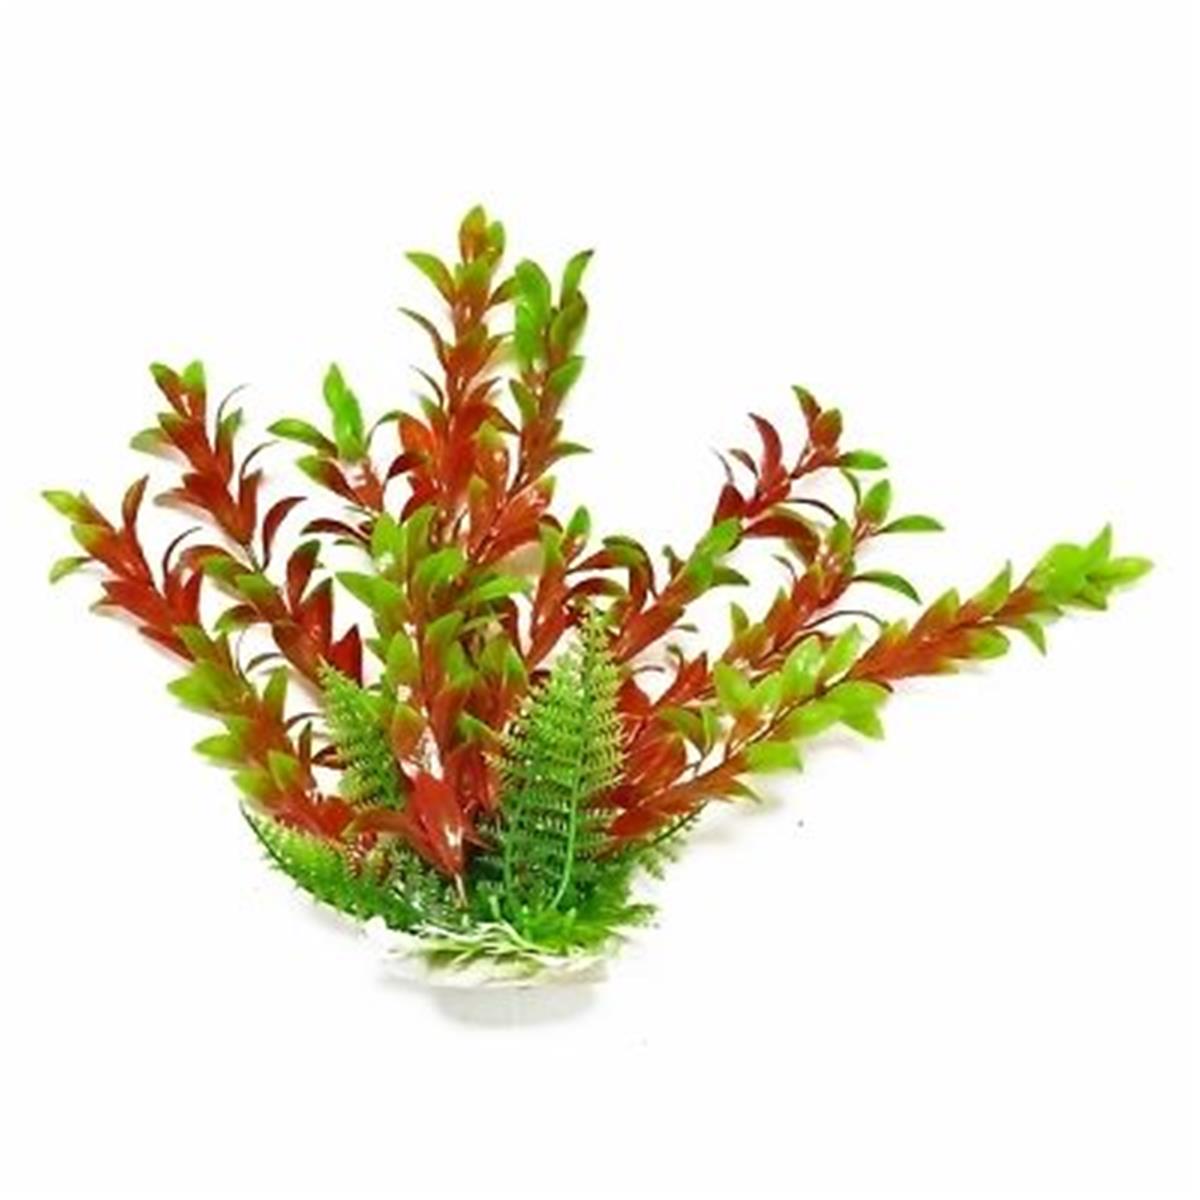 Picture of Aquatop Aquatic Supplies 003588 12 in. Hygro-Like Aquarium Plant with Weighted Base - Green & Red